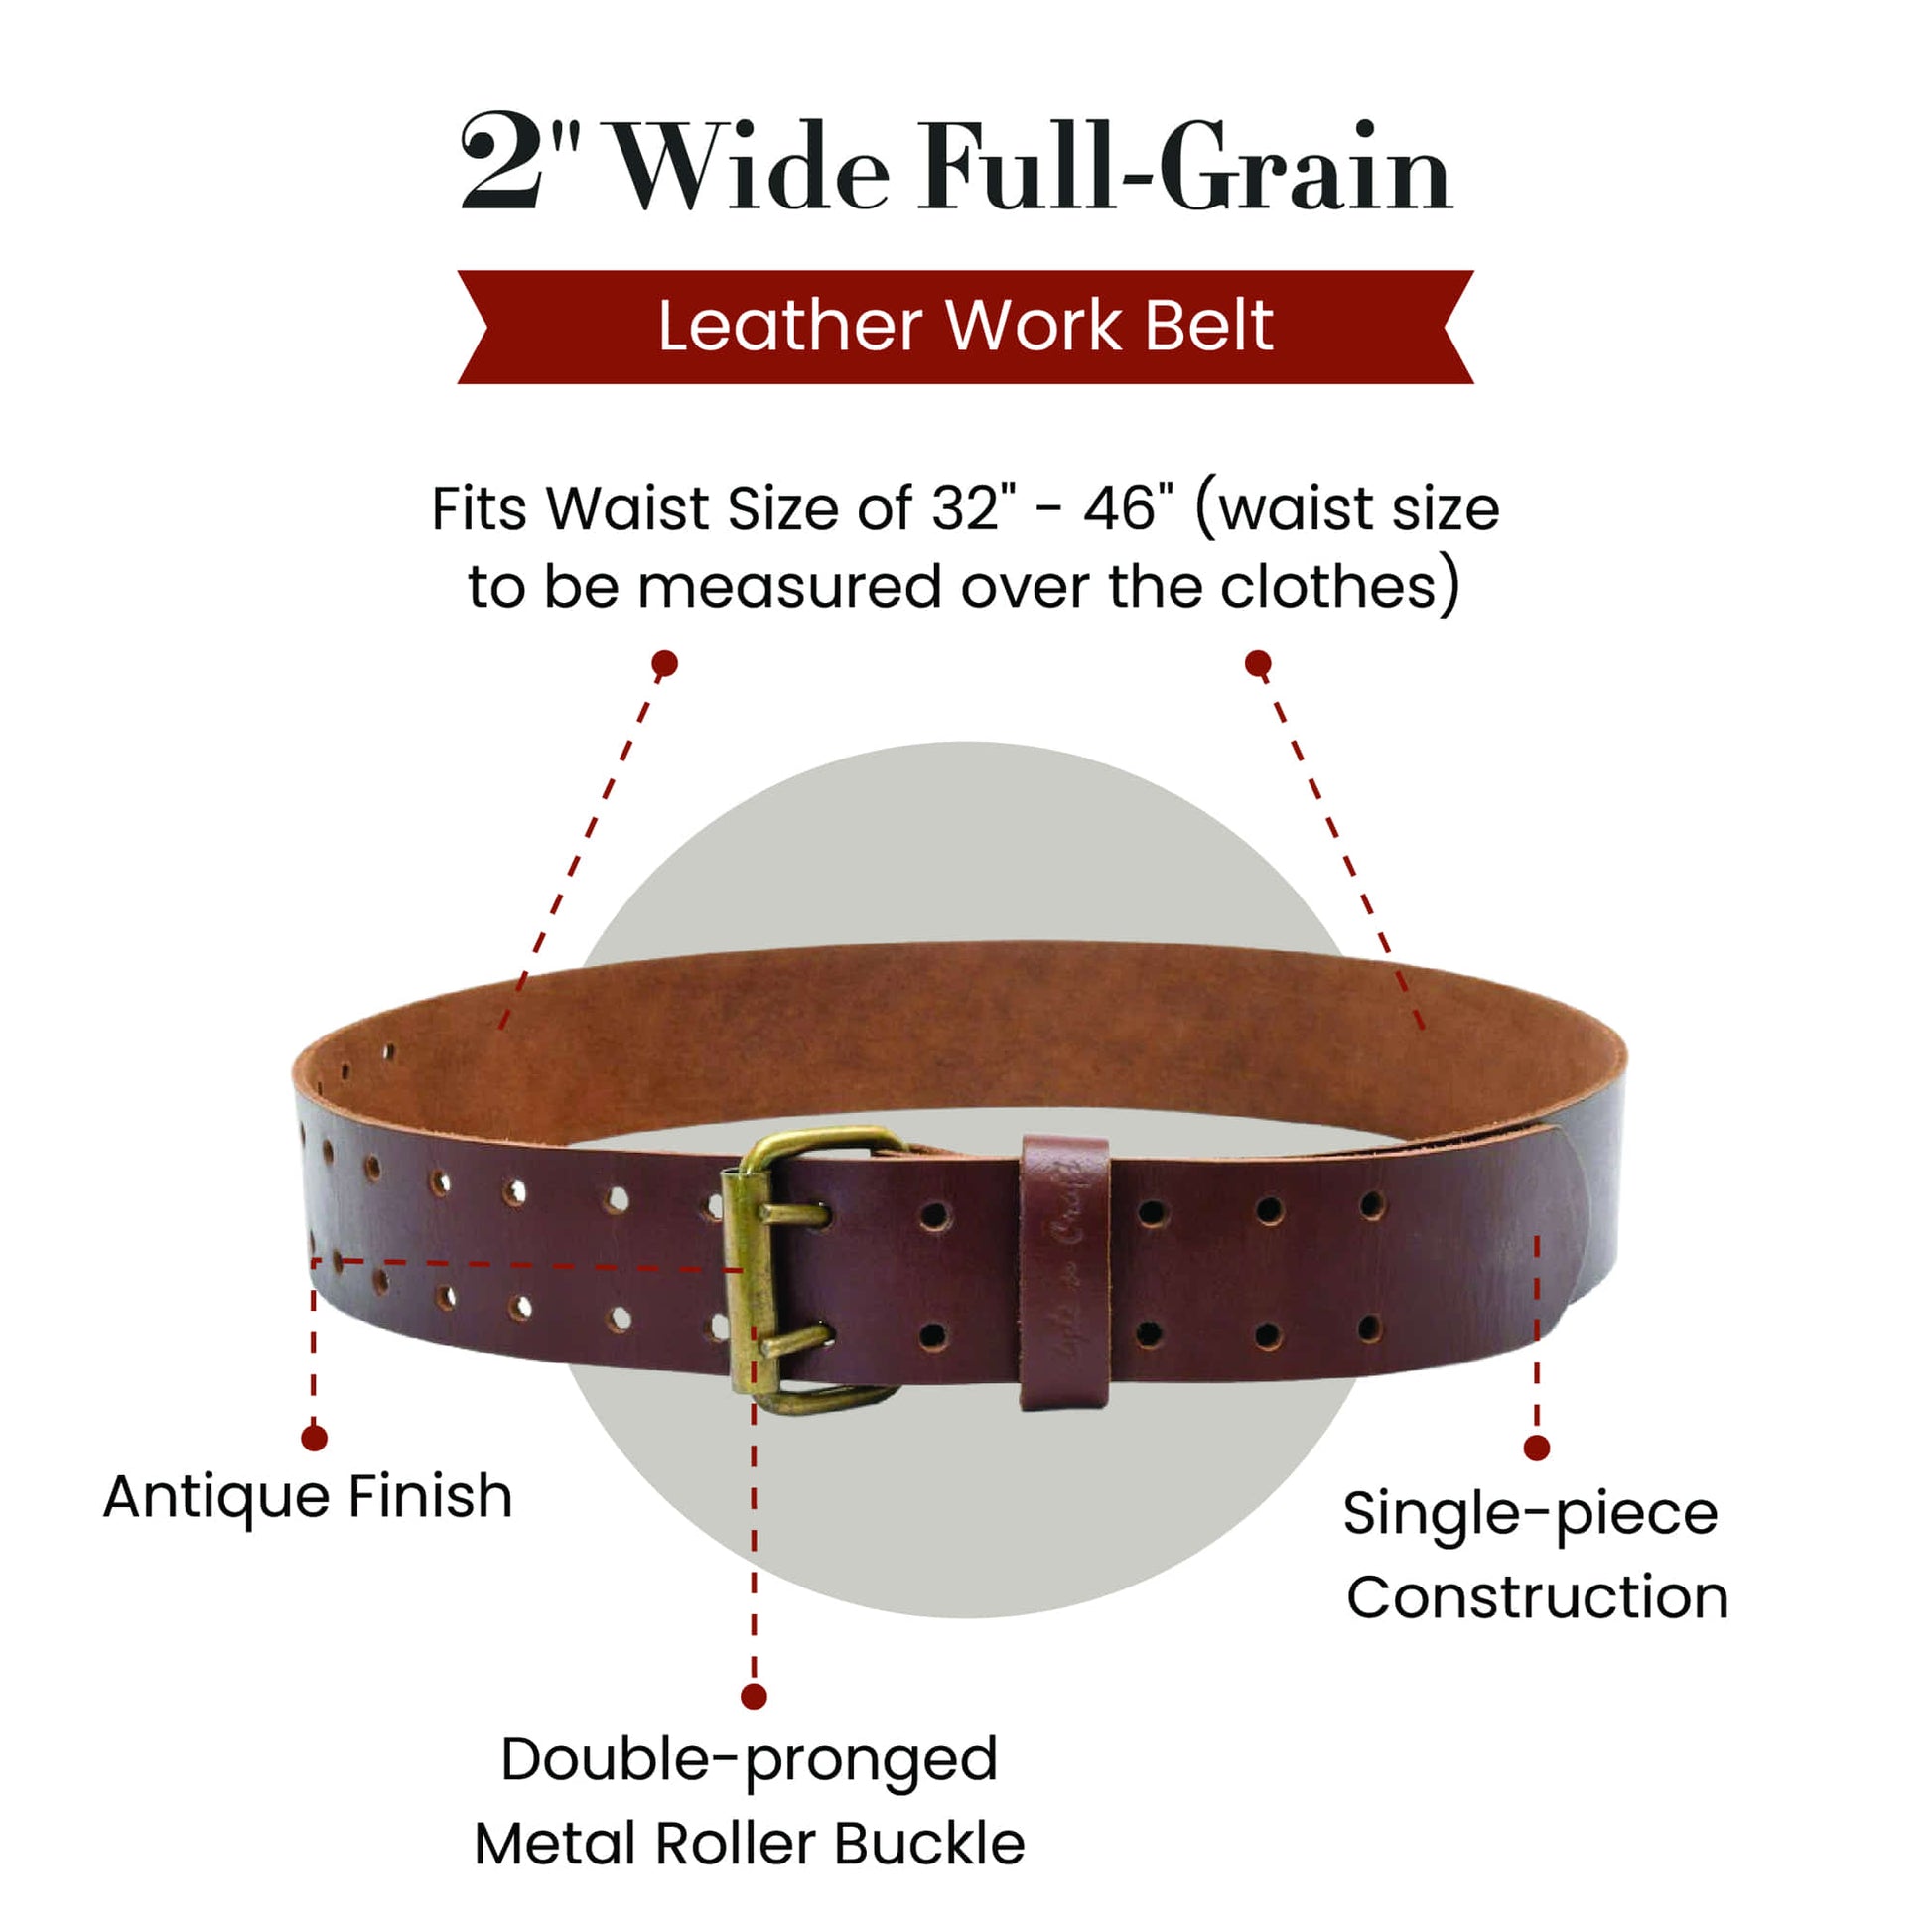 Style n Craft's 98052 - 2 Inch Wide Work Belt in Heavy Full Grain Leather in Dark Tan Color with Double Prong Metal Roller Buckle in Antique Finish - Front View showing the Details